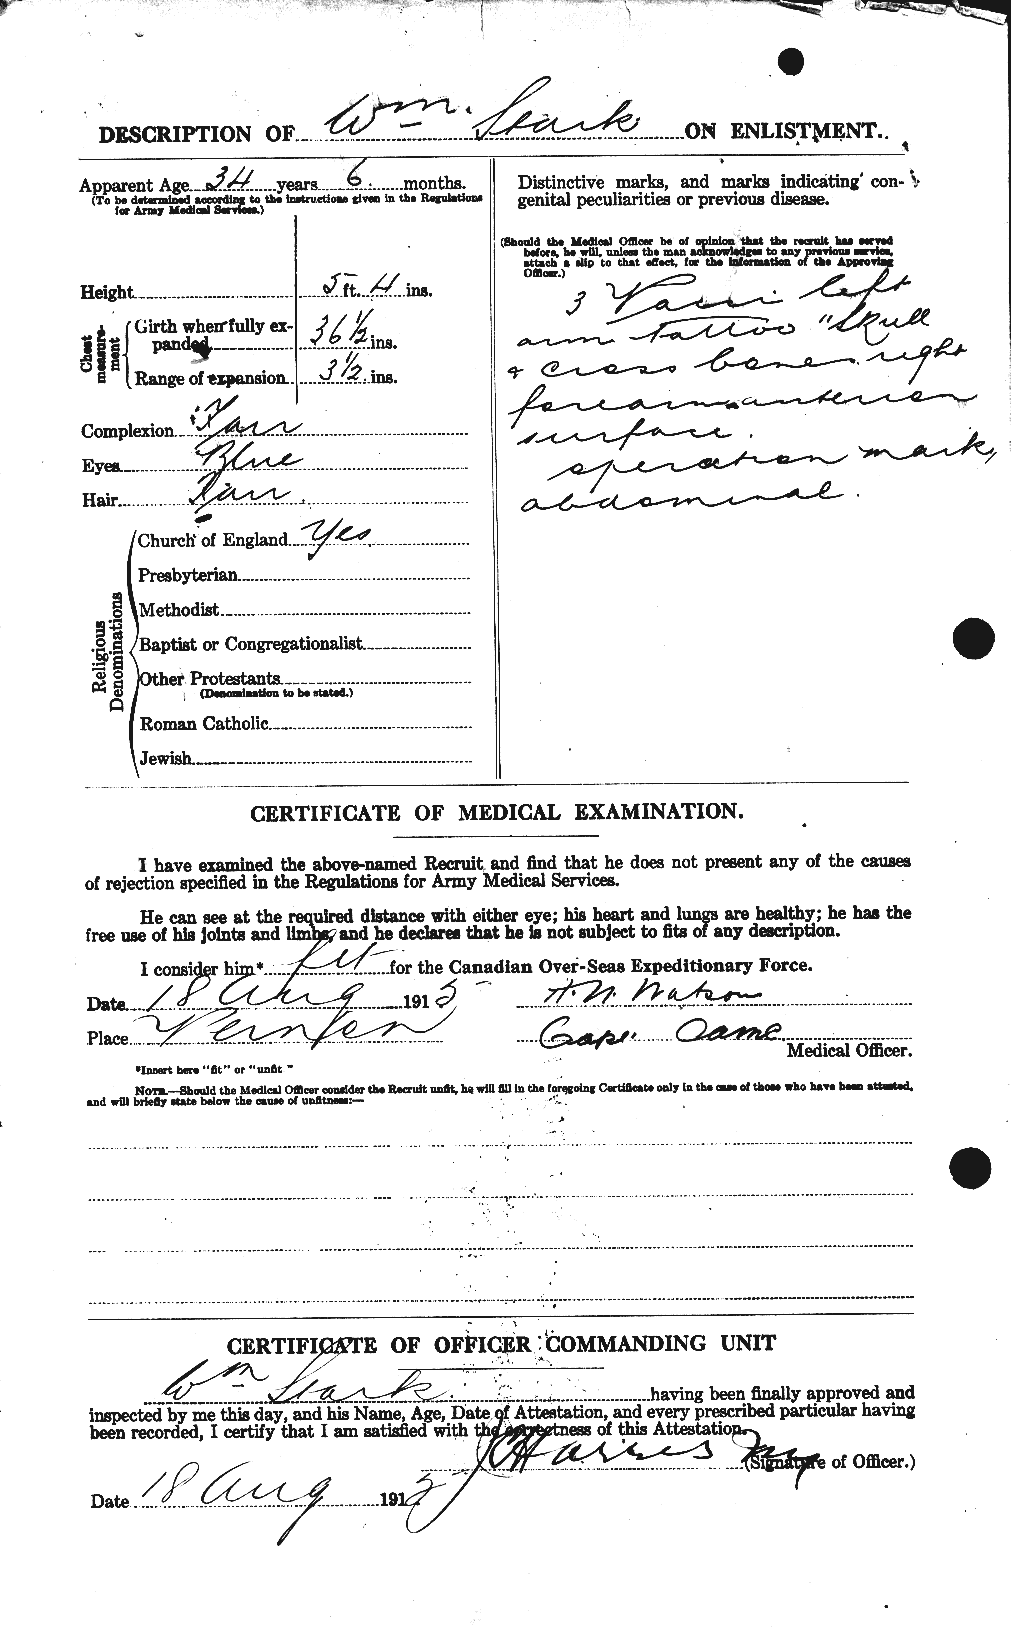 Personnel Records of the First World War - CEF 116747b